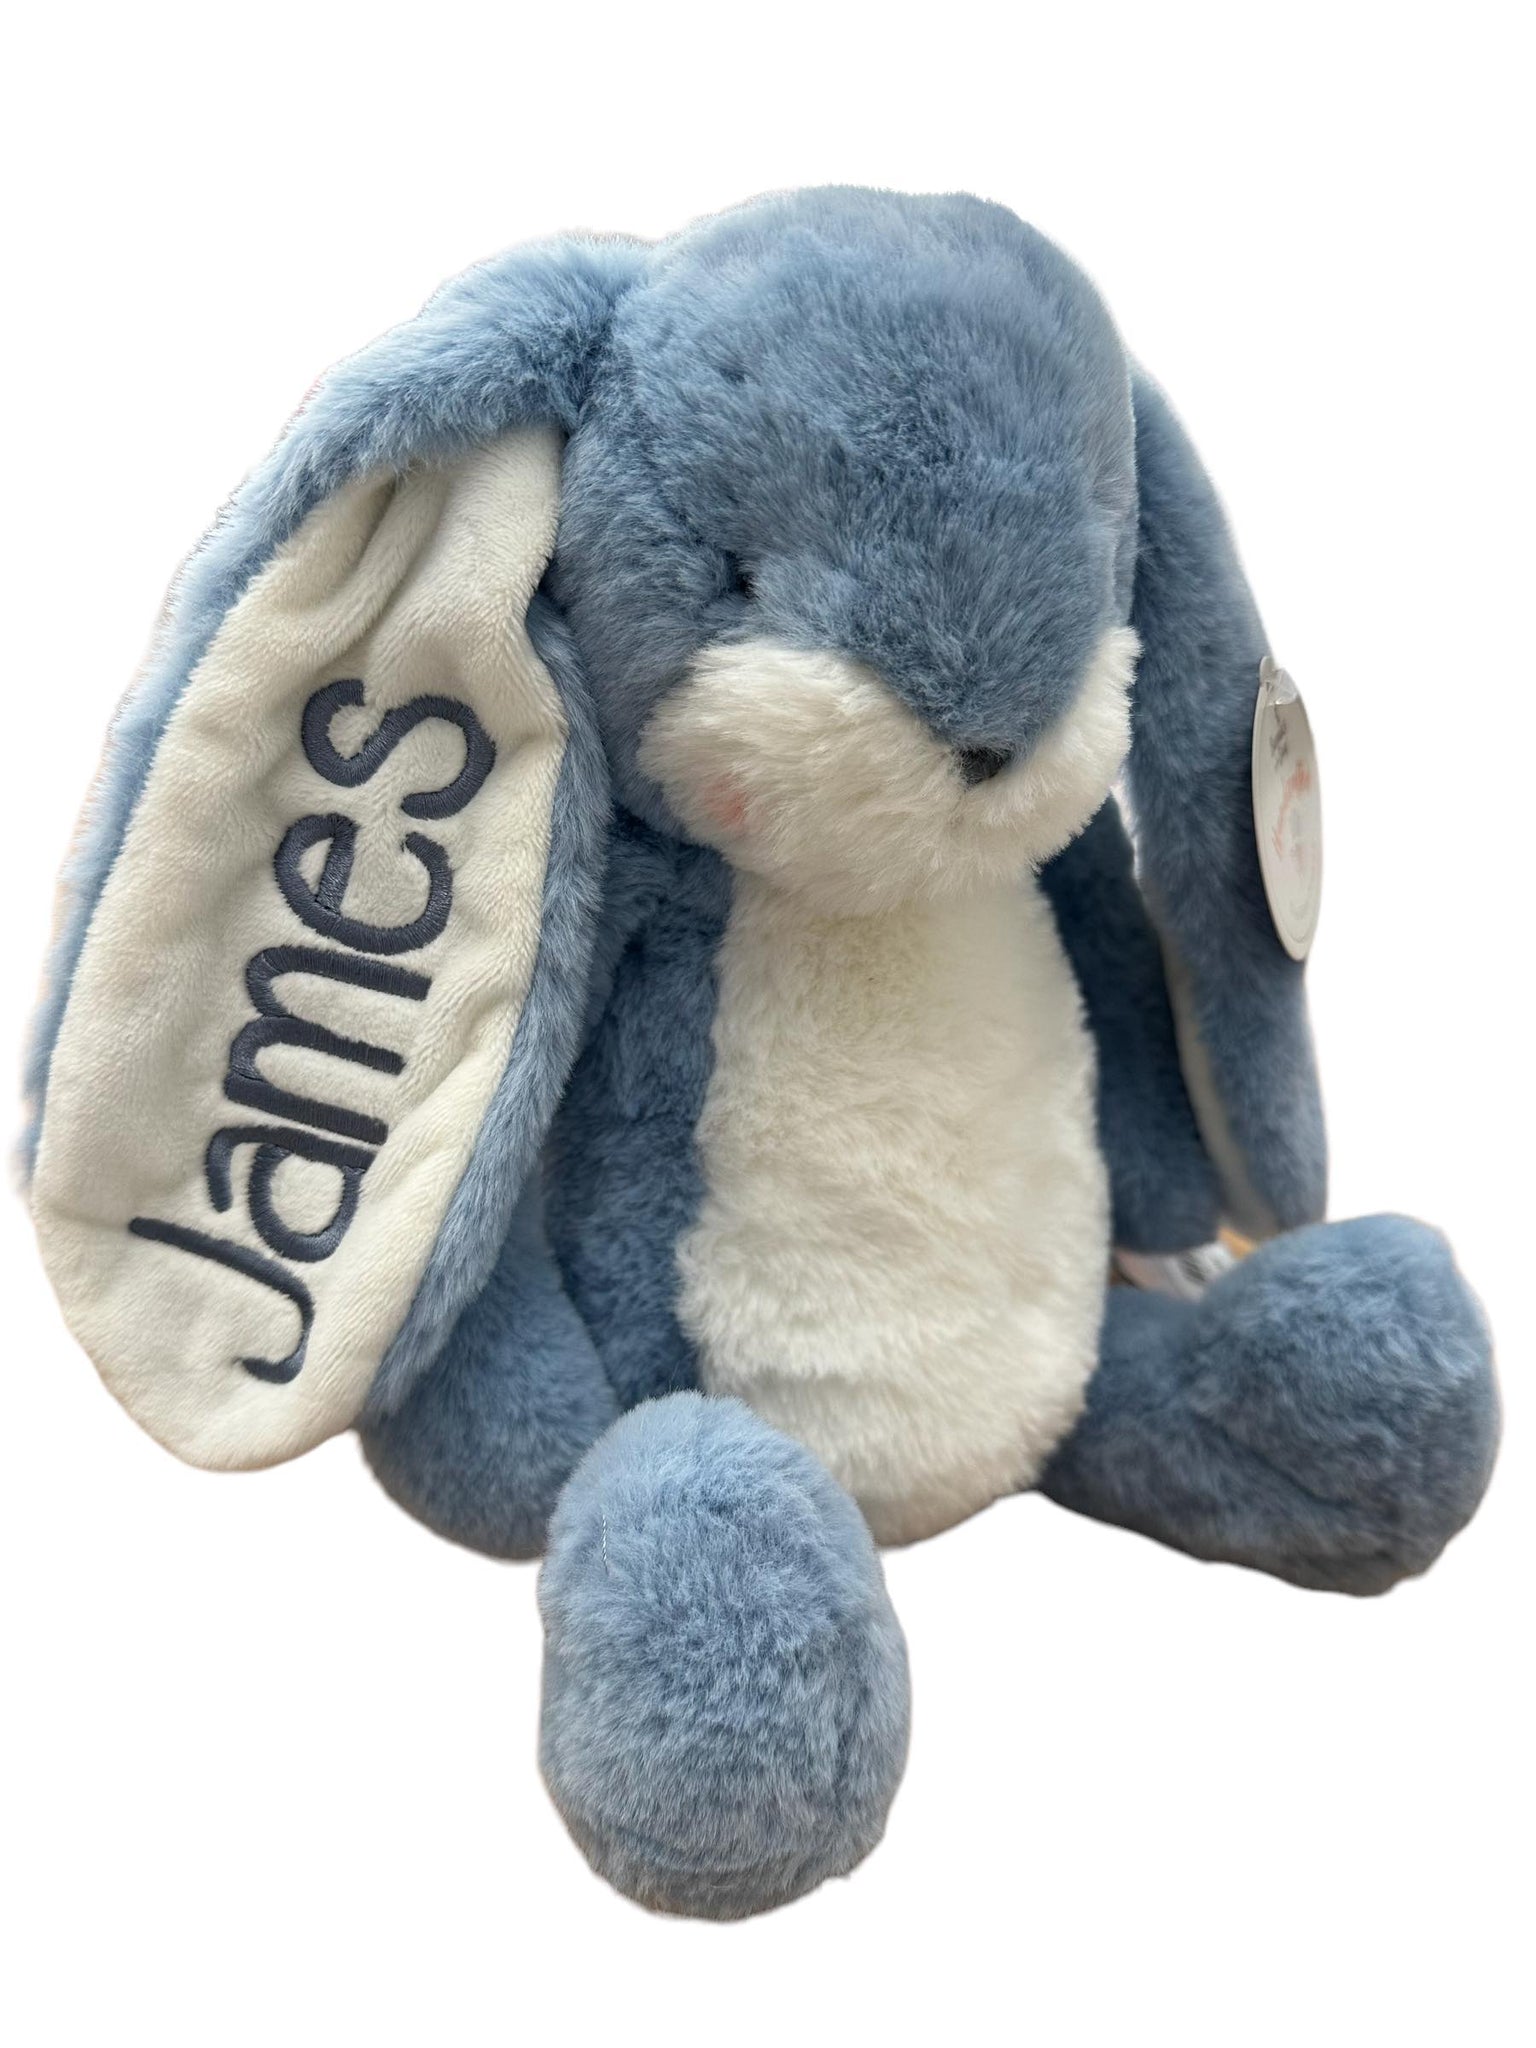 Personalized Bunnies By the Bay - Little Nibble 12" Floppy Bunny - Blue (Lavender Lustre)